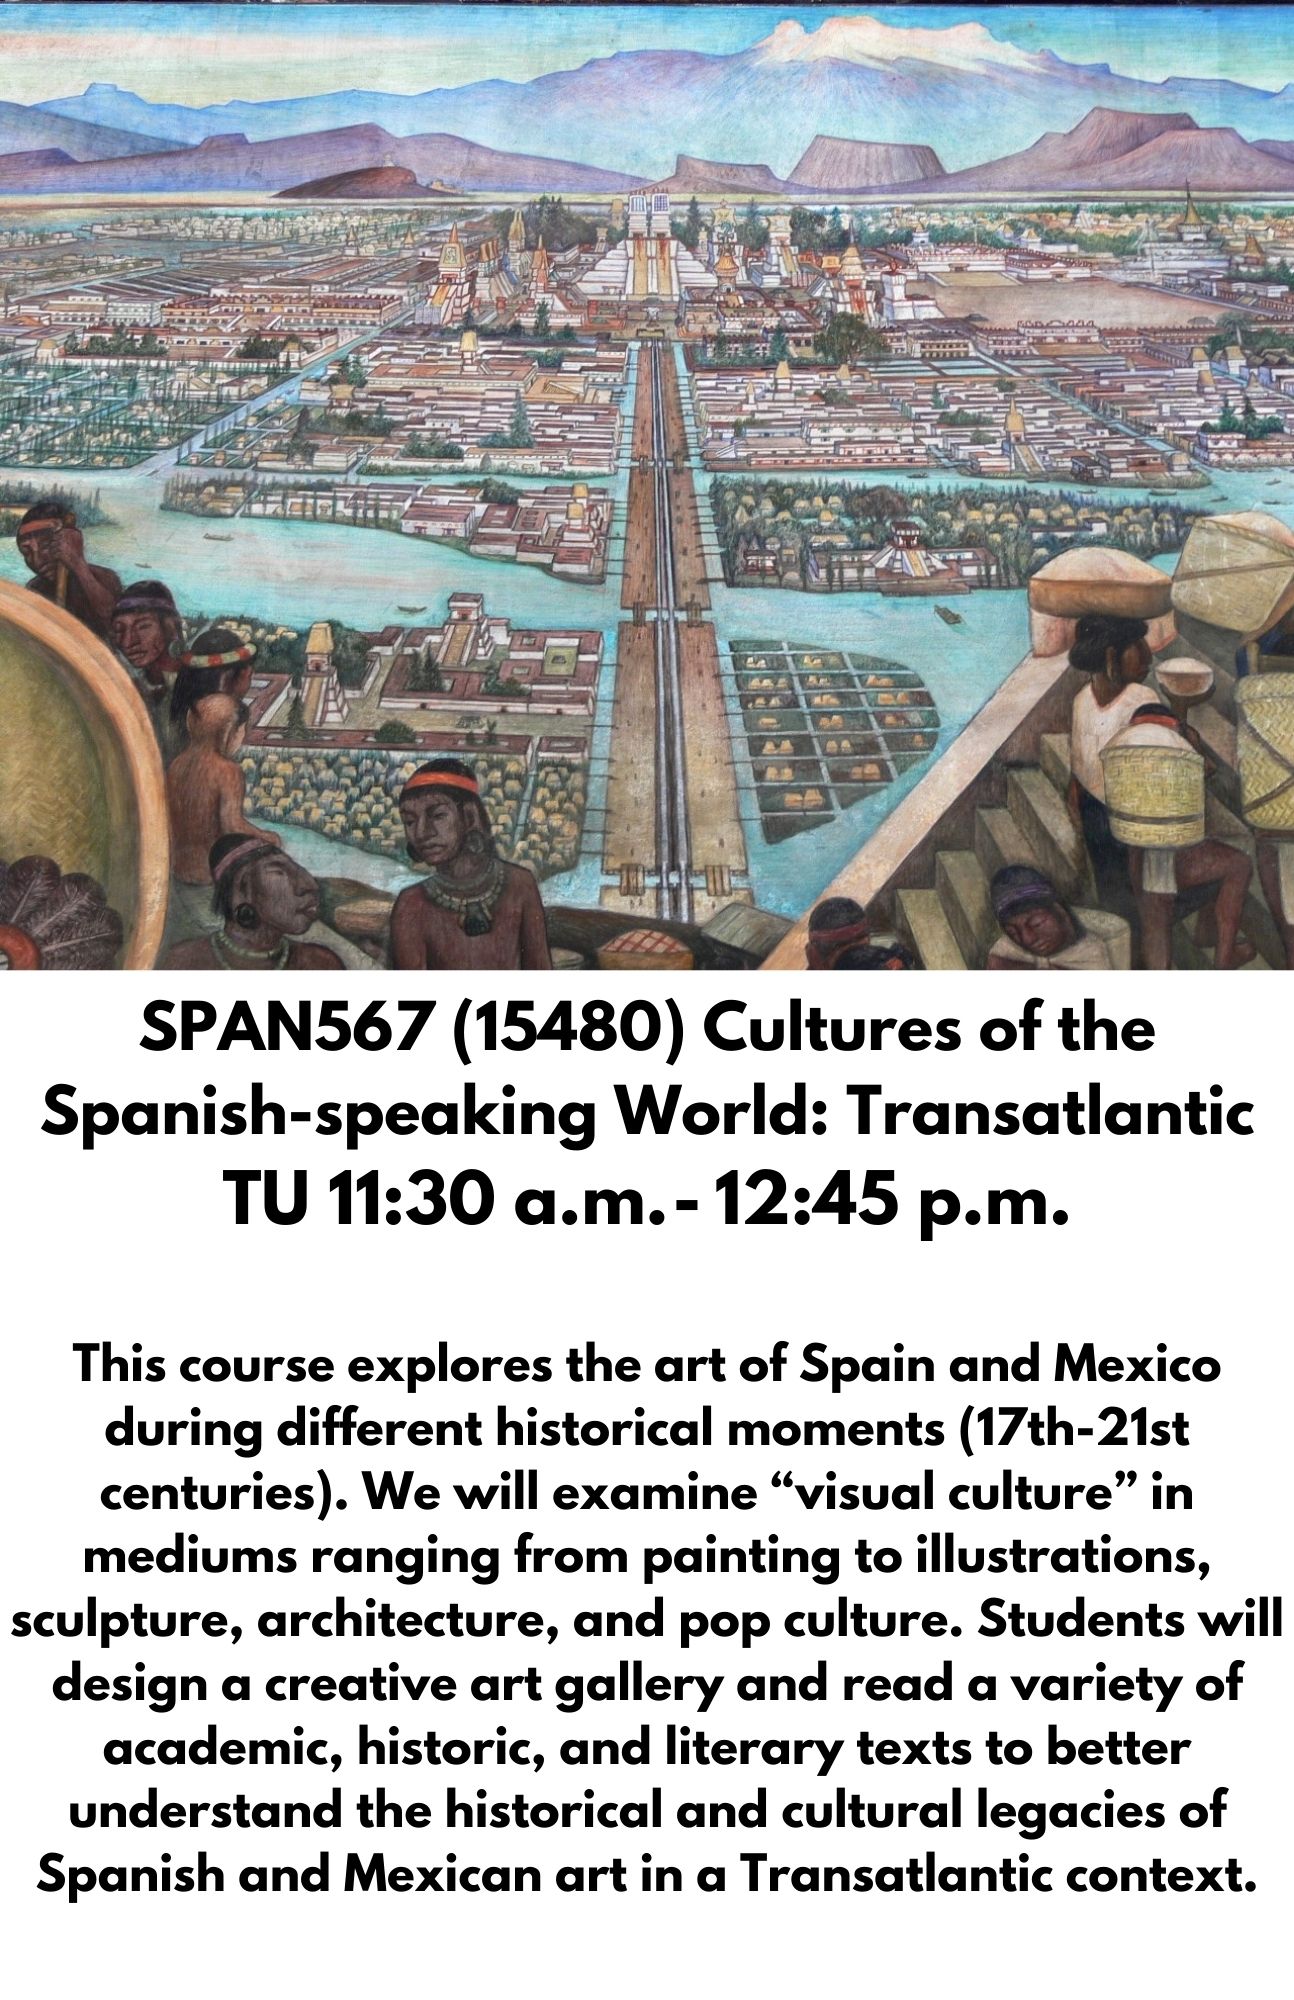 Spanish 567 (14693)- Hispanic Cinema - Top/Span American Cinema TuTh 11:00-12:15  This course explores the art of Spain and Mexico during different historical moments (17th-21st centuries). We will examine “visual culture” in mediums ranging from painting to illustrations, sculpture, architecture, and pop culture. Students will design a creative art gallery and read a variety of academic, historic, and literary texts to better understand the historical and cultural legacies of Spanish and Mexican art in a Transatlantic context.